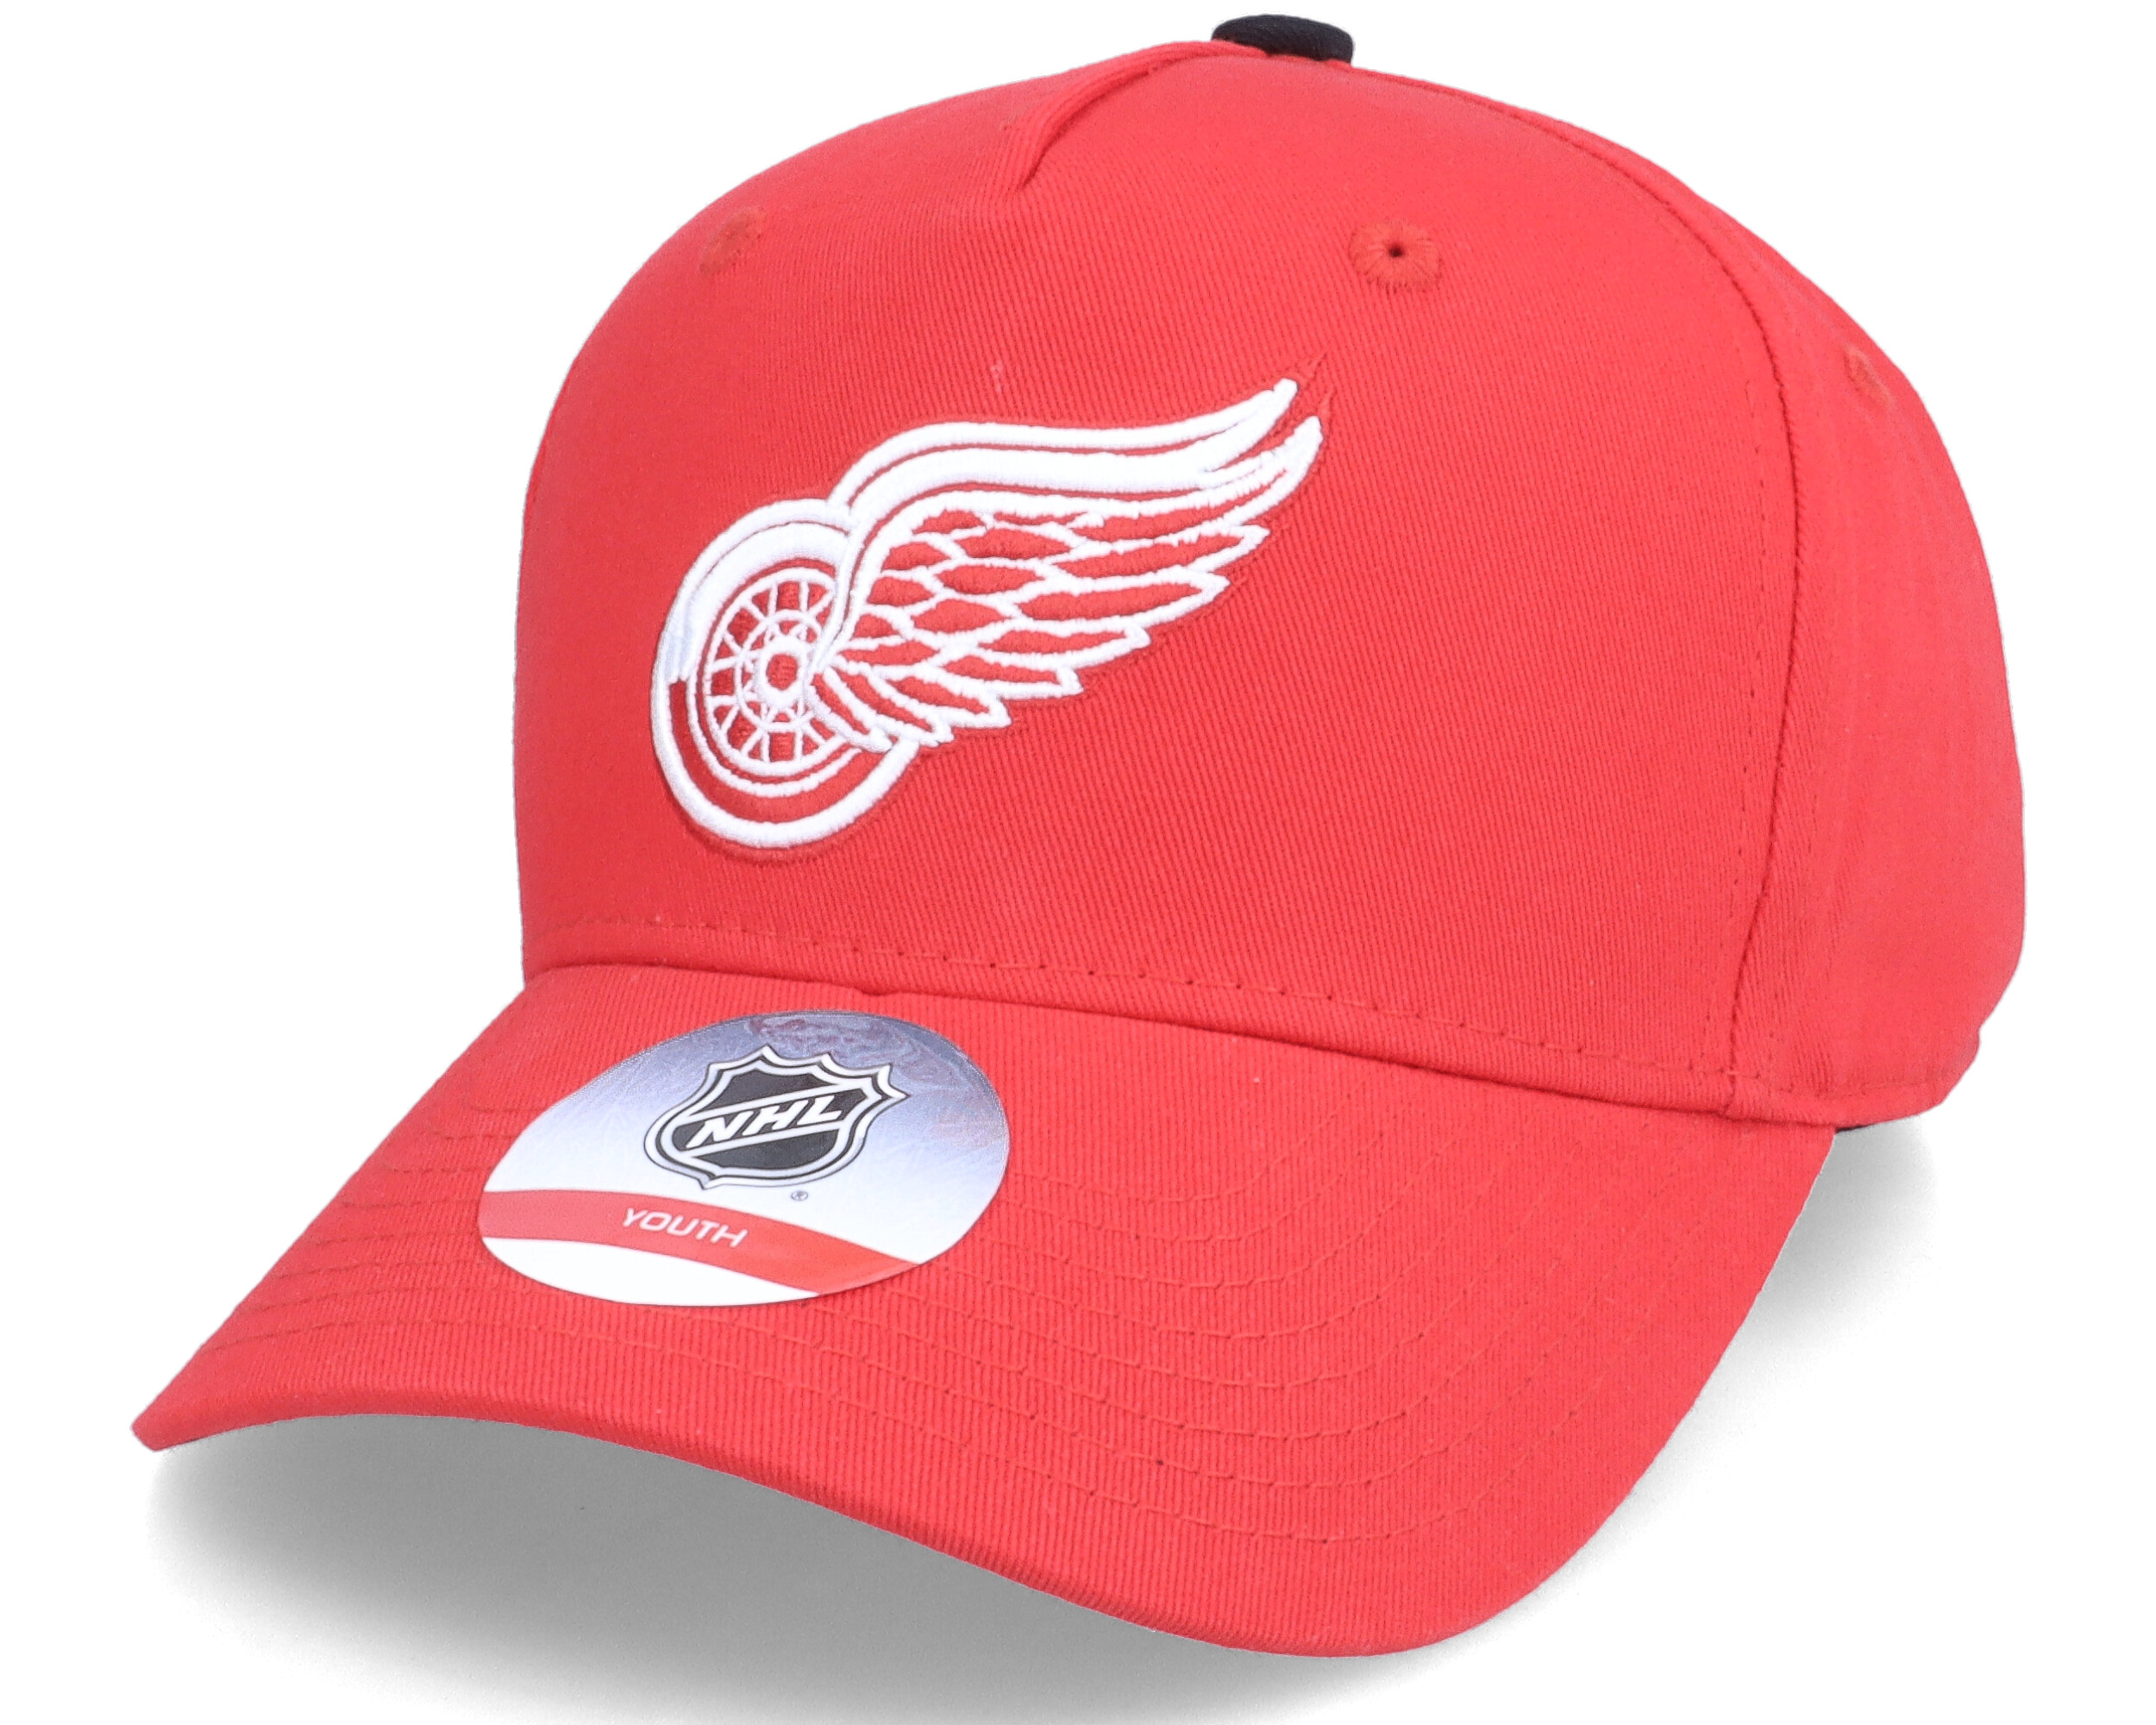 Outerstuff Precurved Snapback Hat - Detroit Red Wings - Youth